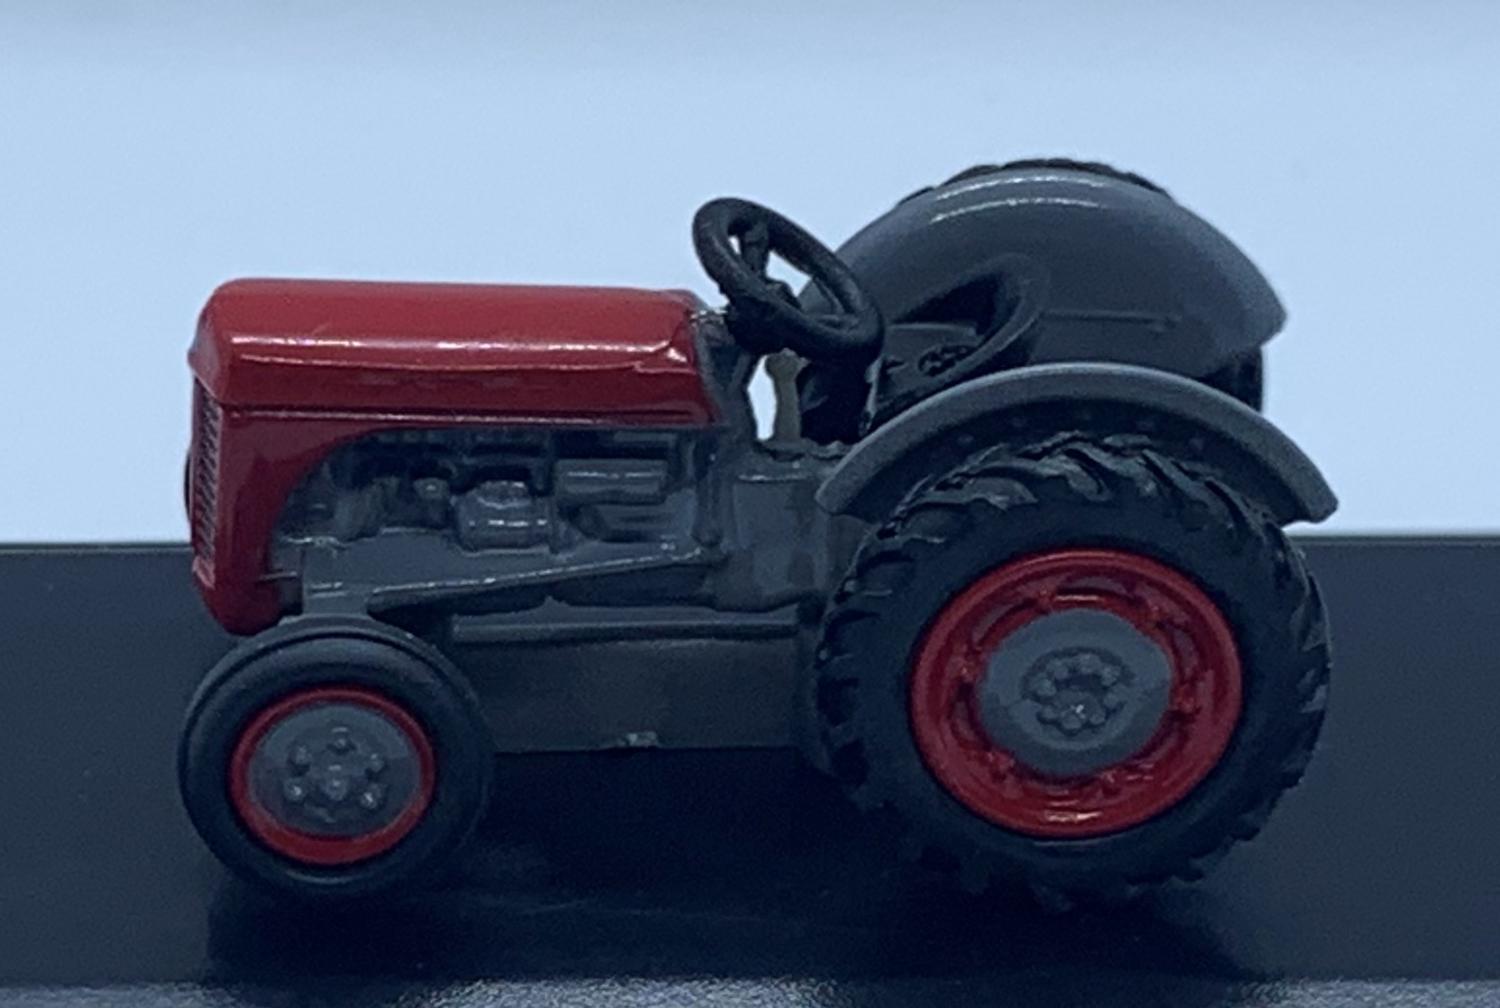 Ferguson TEA Tractor in Red 1:76 scale from Oxford Diecast